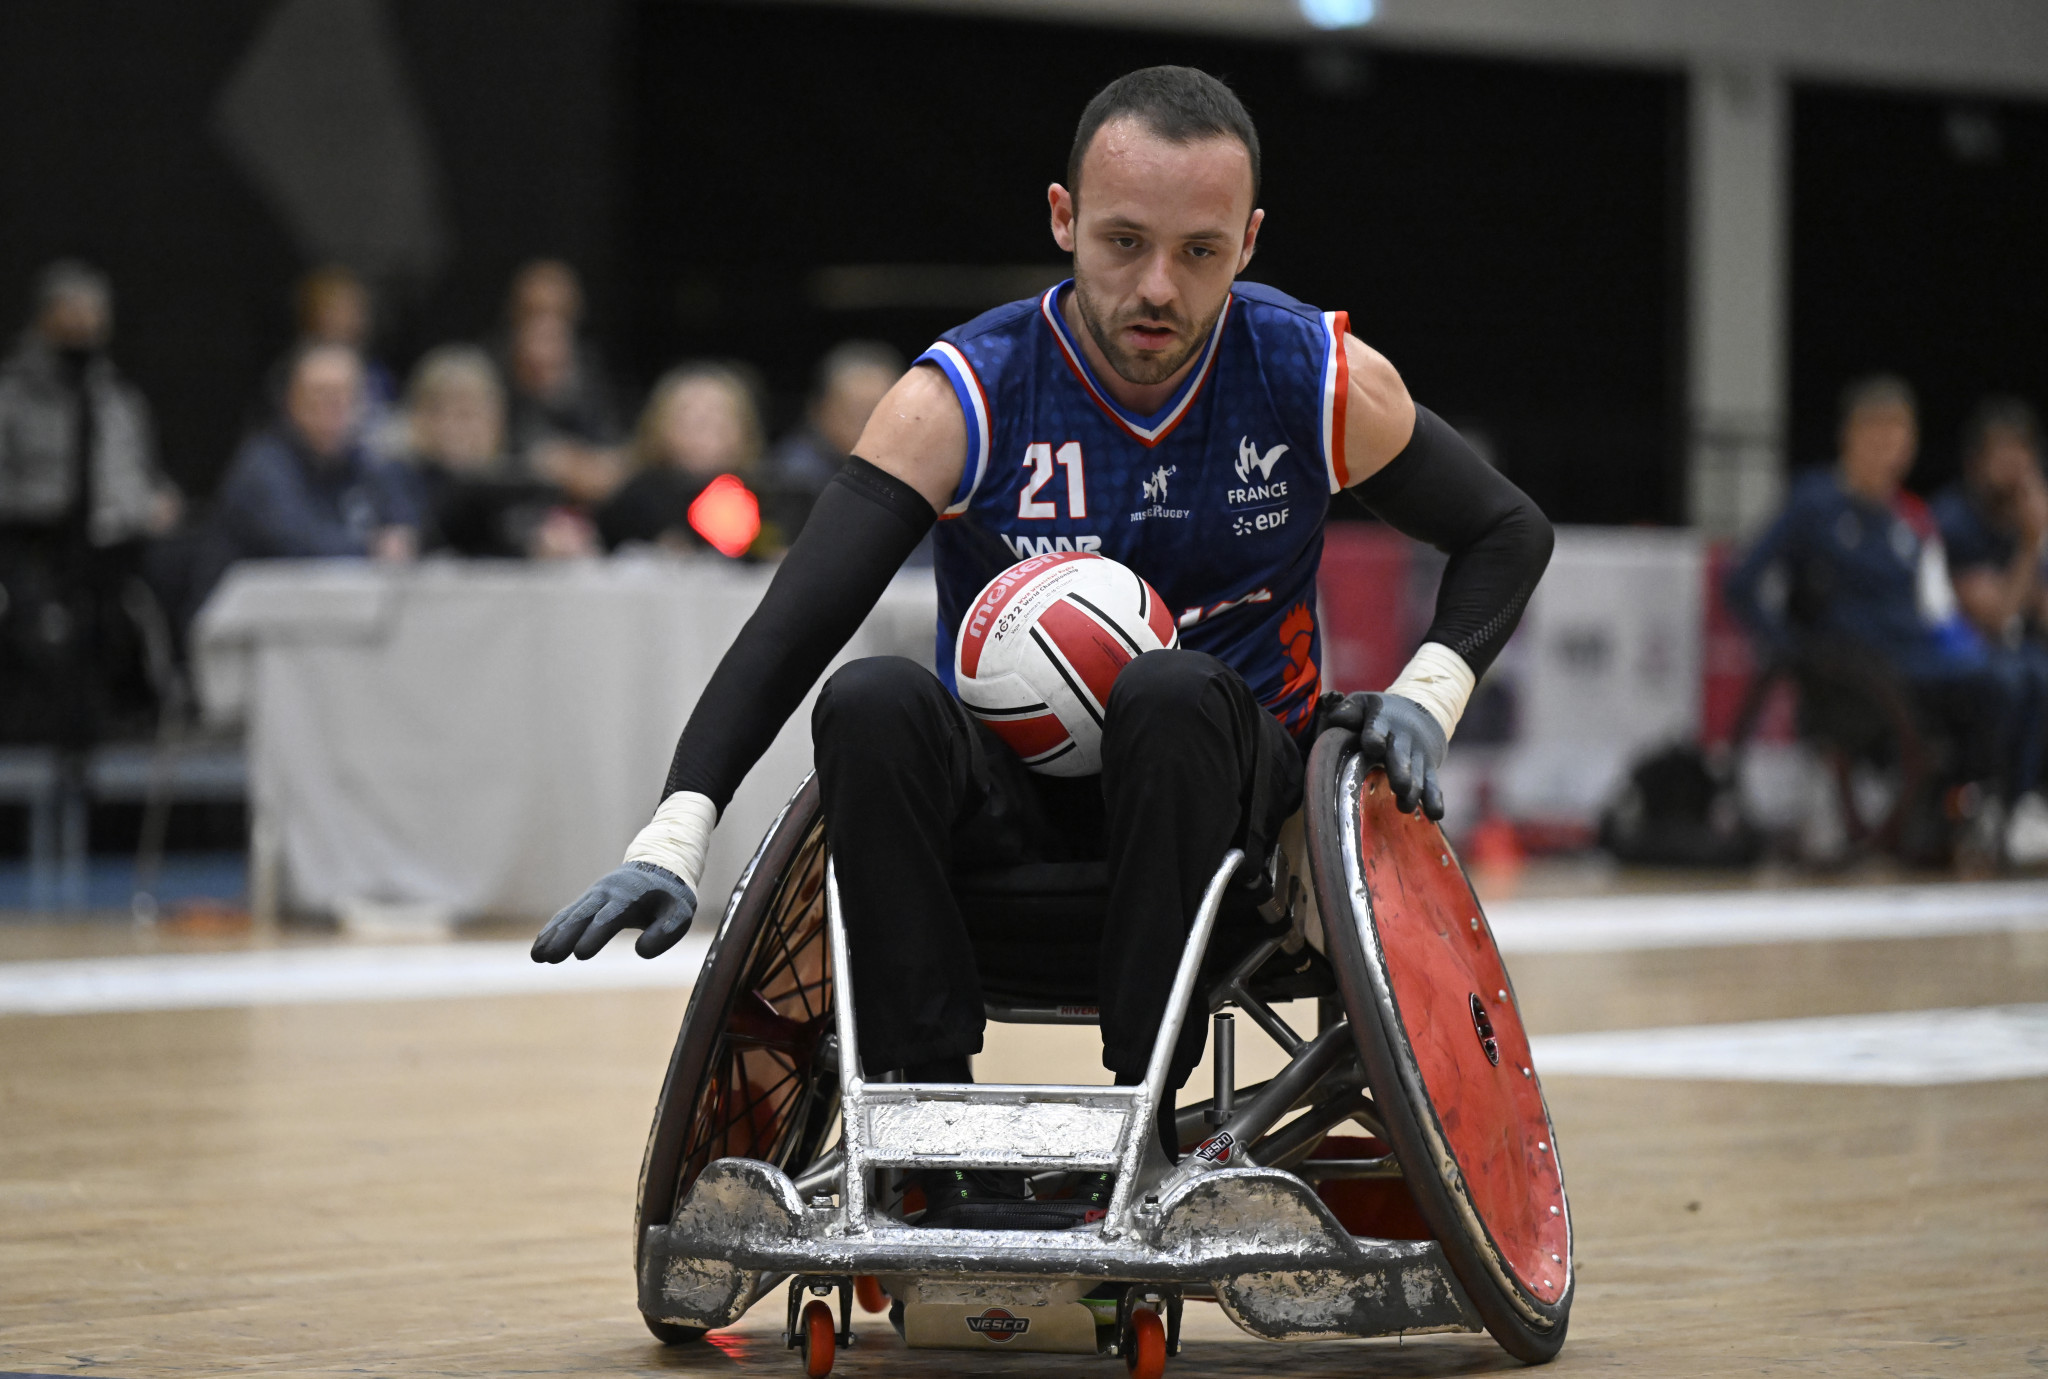 France are due to meet Canada tomorrow with the victor officially finishing fifth in the competition ©Lars Møller/Parasport Denmark